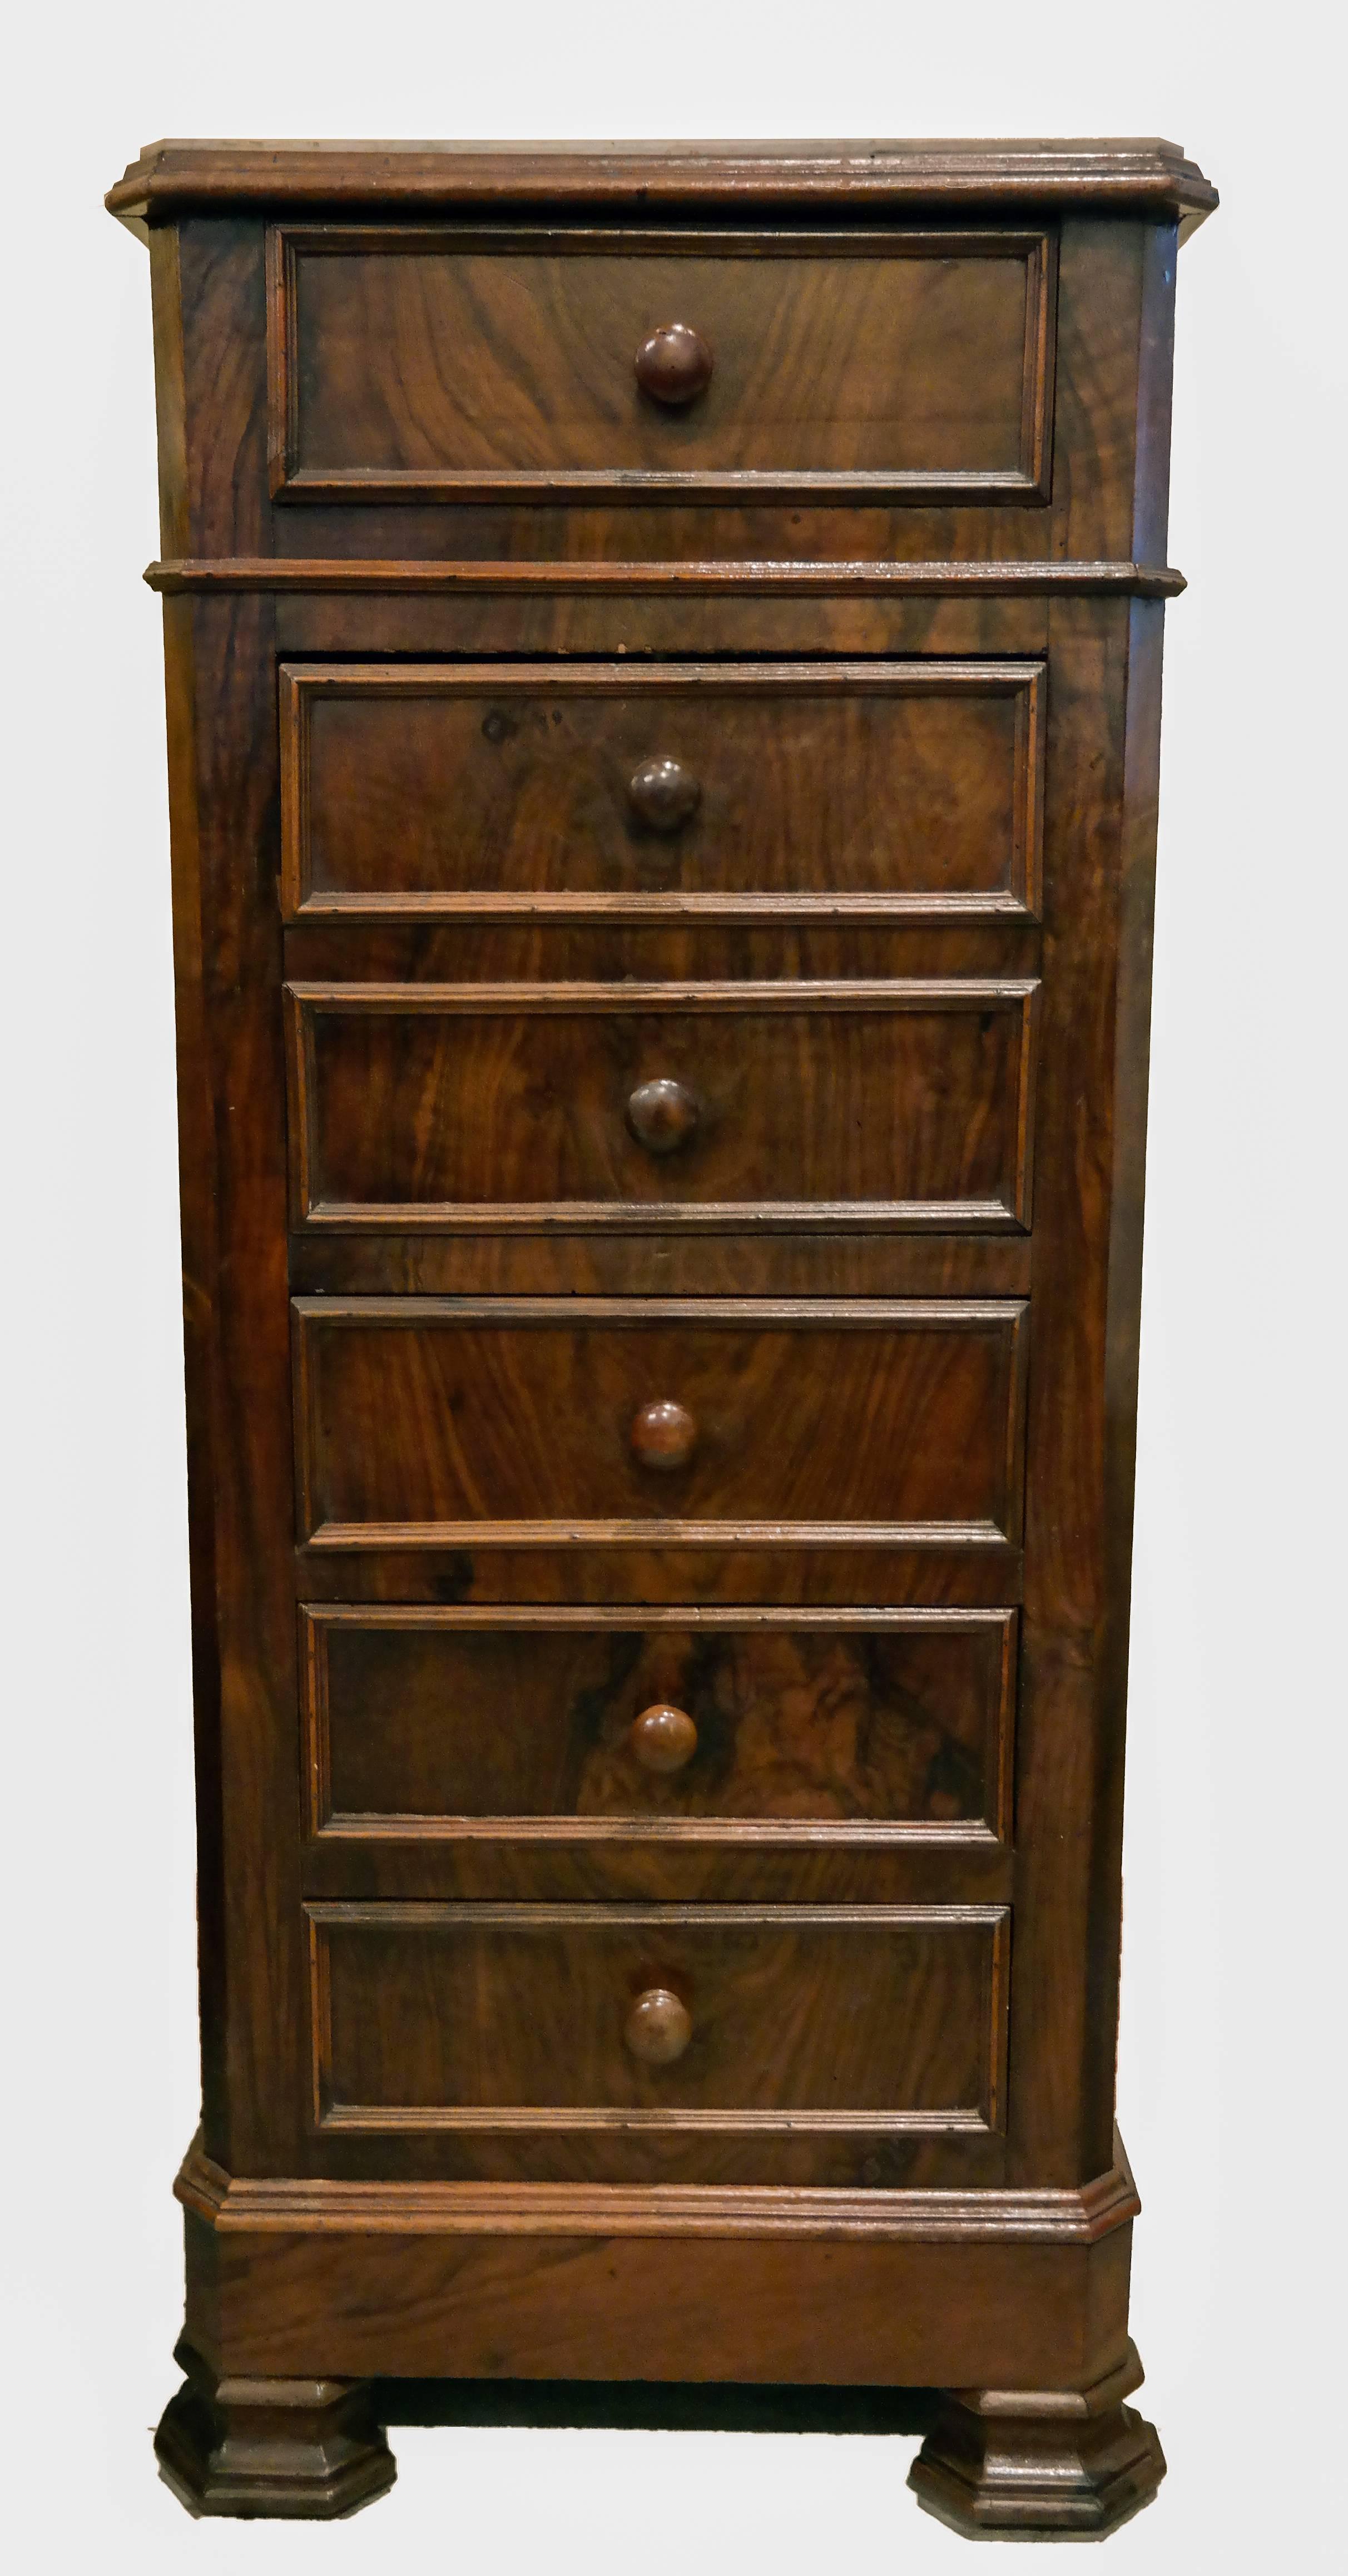 Italian walnut six drawer lingerie chest, with marble top. ca. 1900